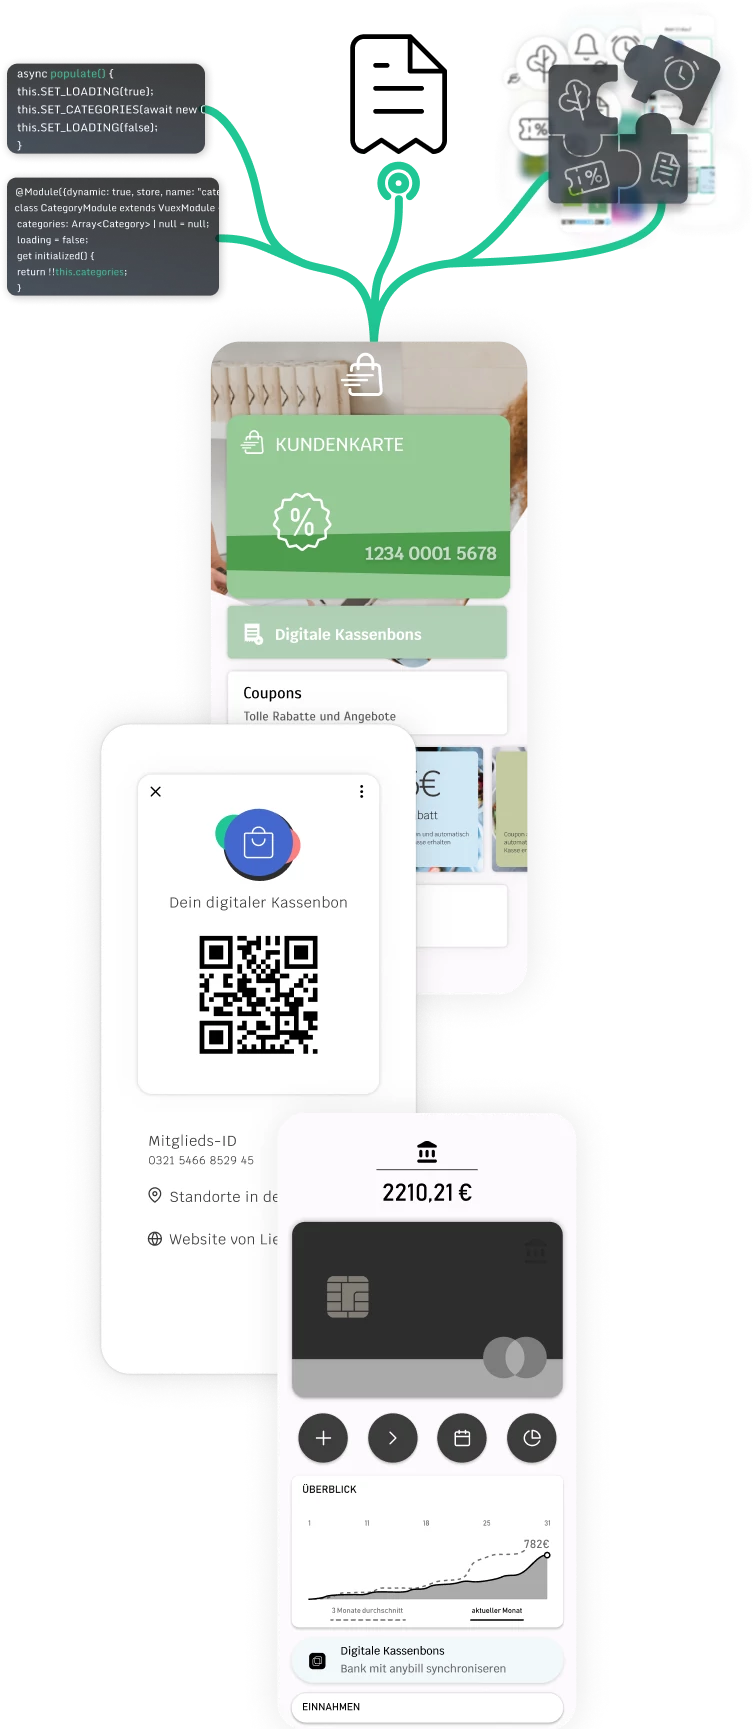 Abstract illustration of the connection of merchant app, QR code in anybill app and an example banking app with the possibilities of a digital receipt